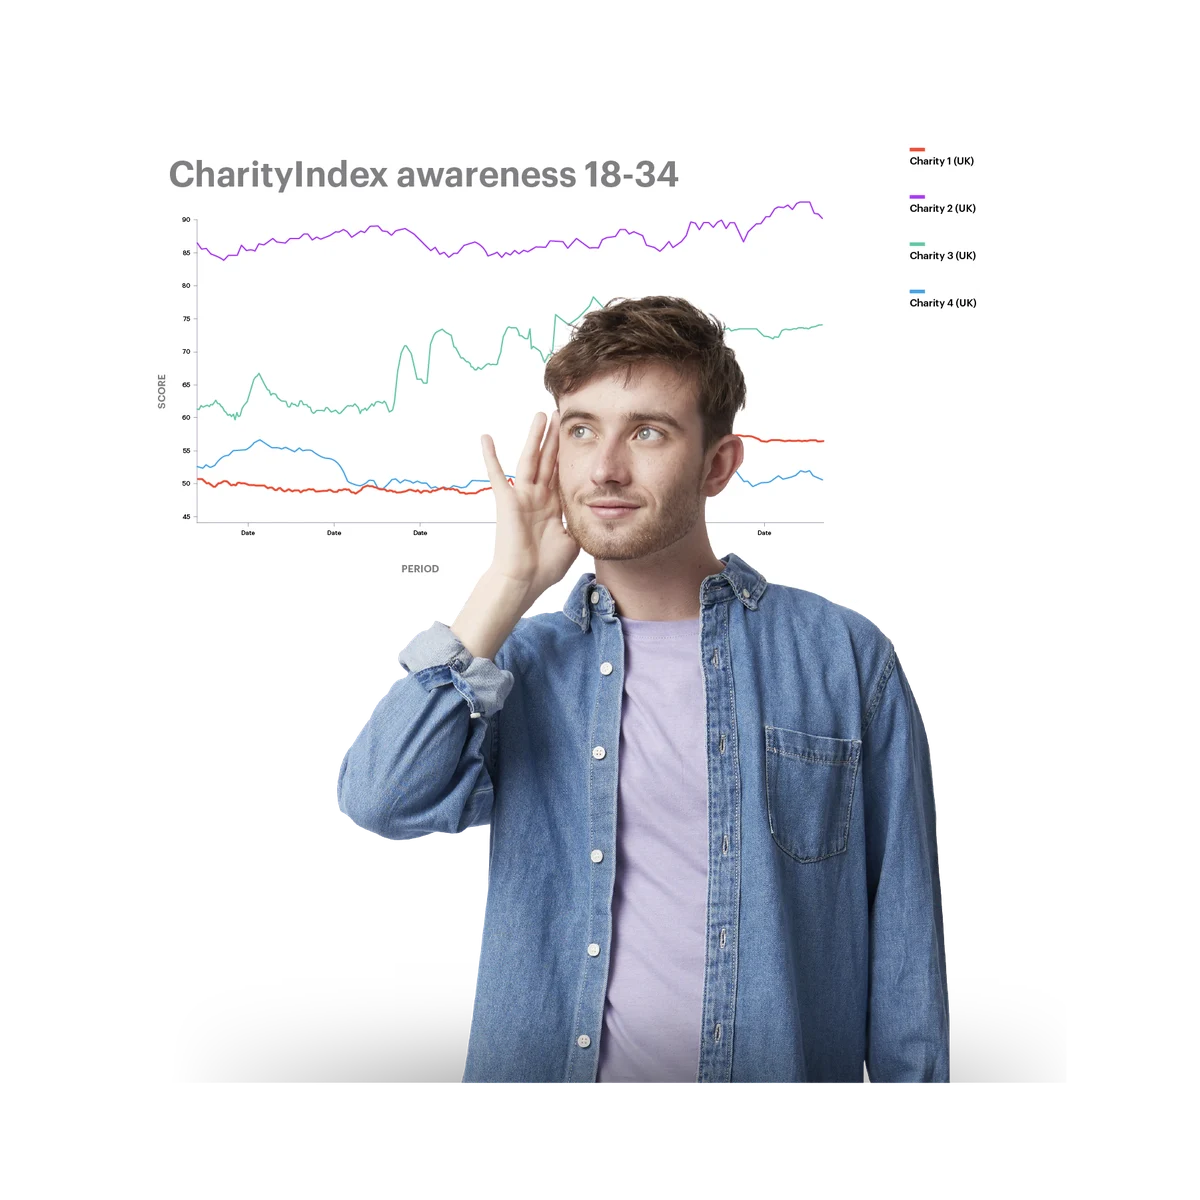 man with jean shirt and a charityindex data in the background